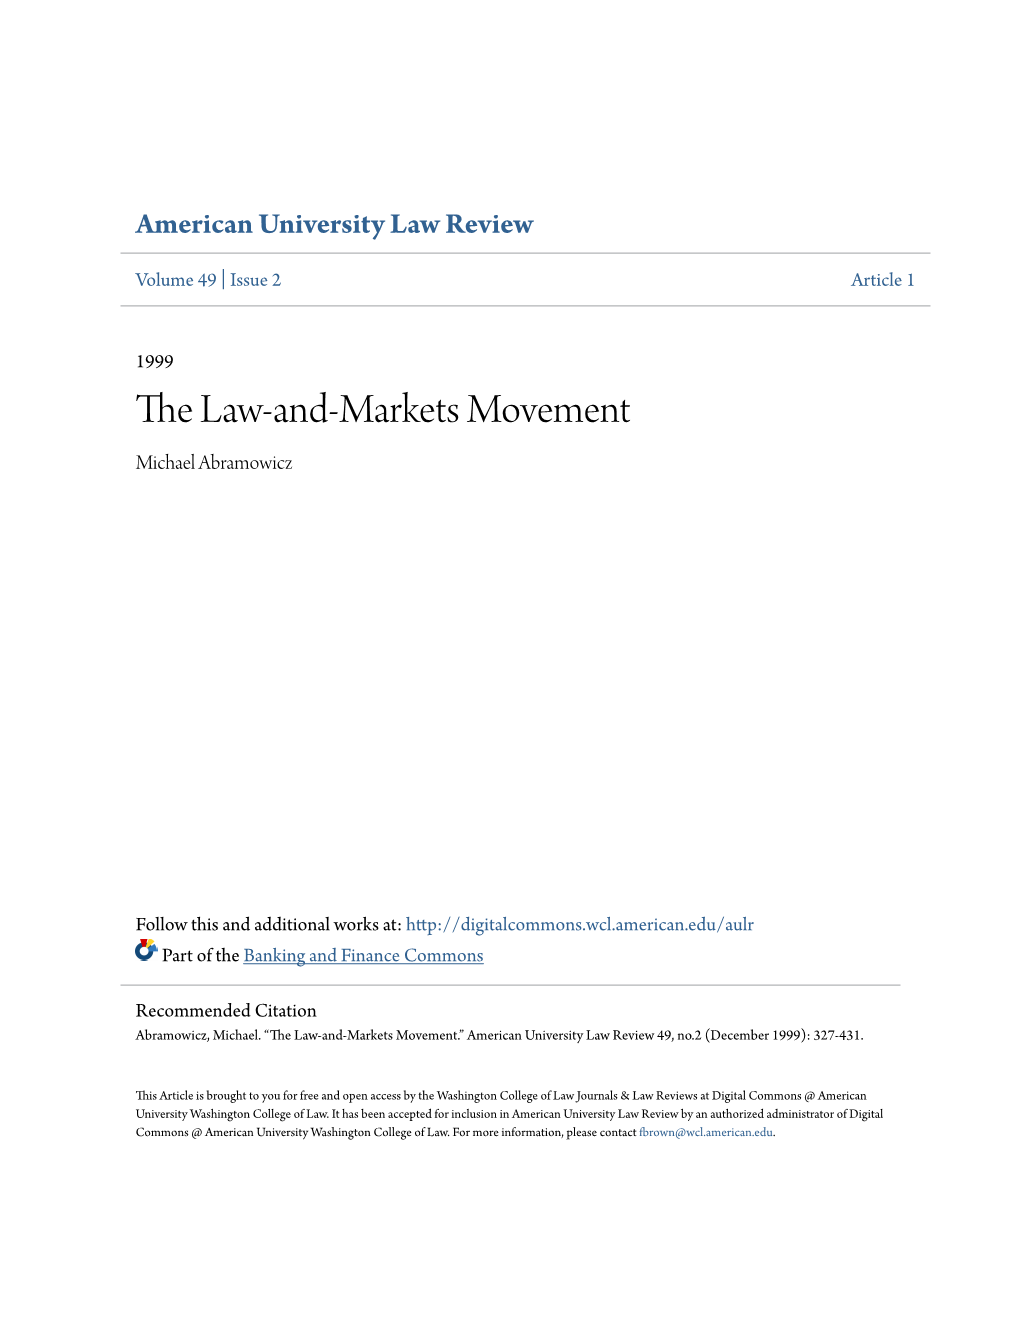 The Law-And-Markets Movement Michael Abramowicz